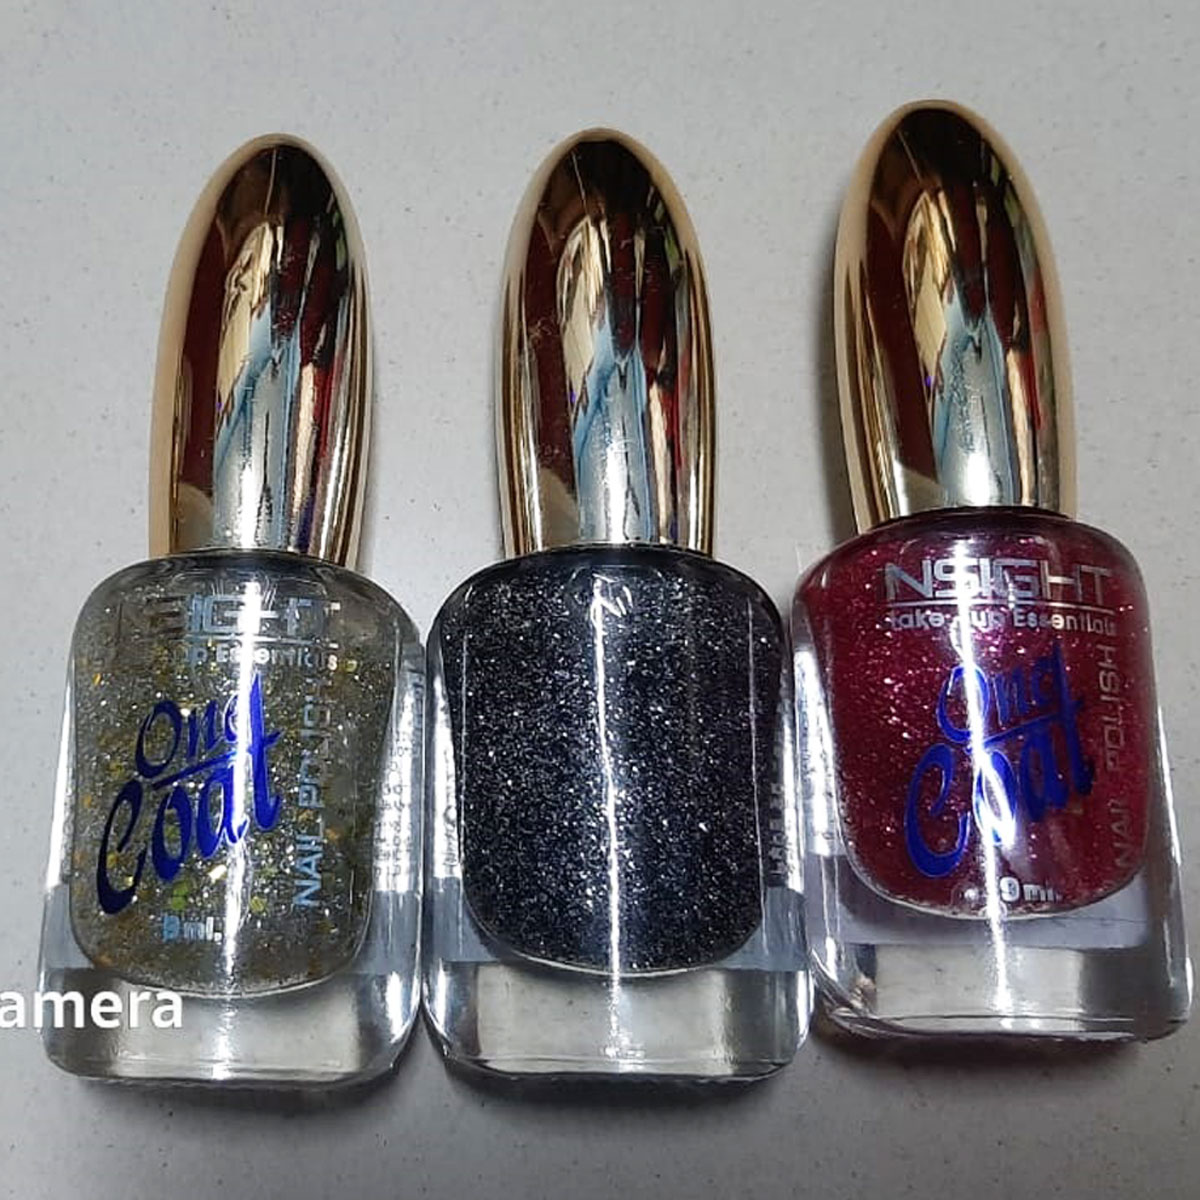 Insight Cosmetics Twilight Nail Polish Formule au Luxembourg (DH154-05) 05  - Price in India, Buy Insight Cosmetics Twilight Nail Polish Formule au  Luxembourg (DH154-05) 05 Online In India, Reviews, Ratings & Features |  Flipkart.com